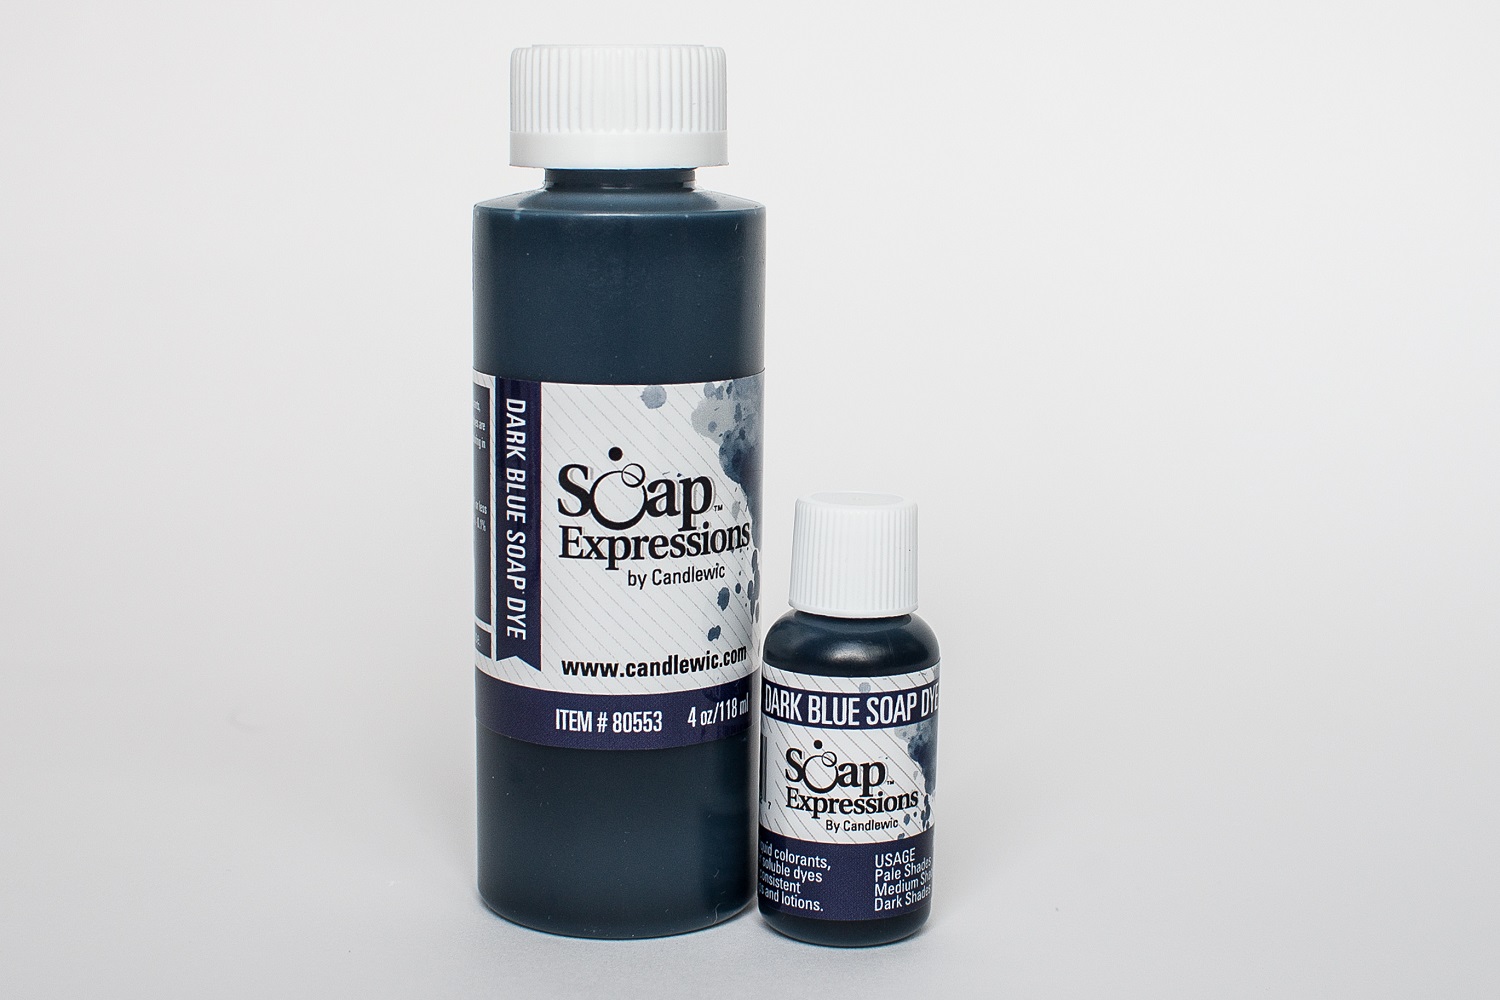 Dark Blue Soap Dye - Candlewic: Candle Making Supplies Since 1972